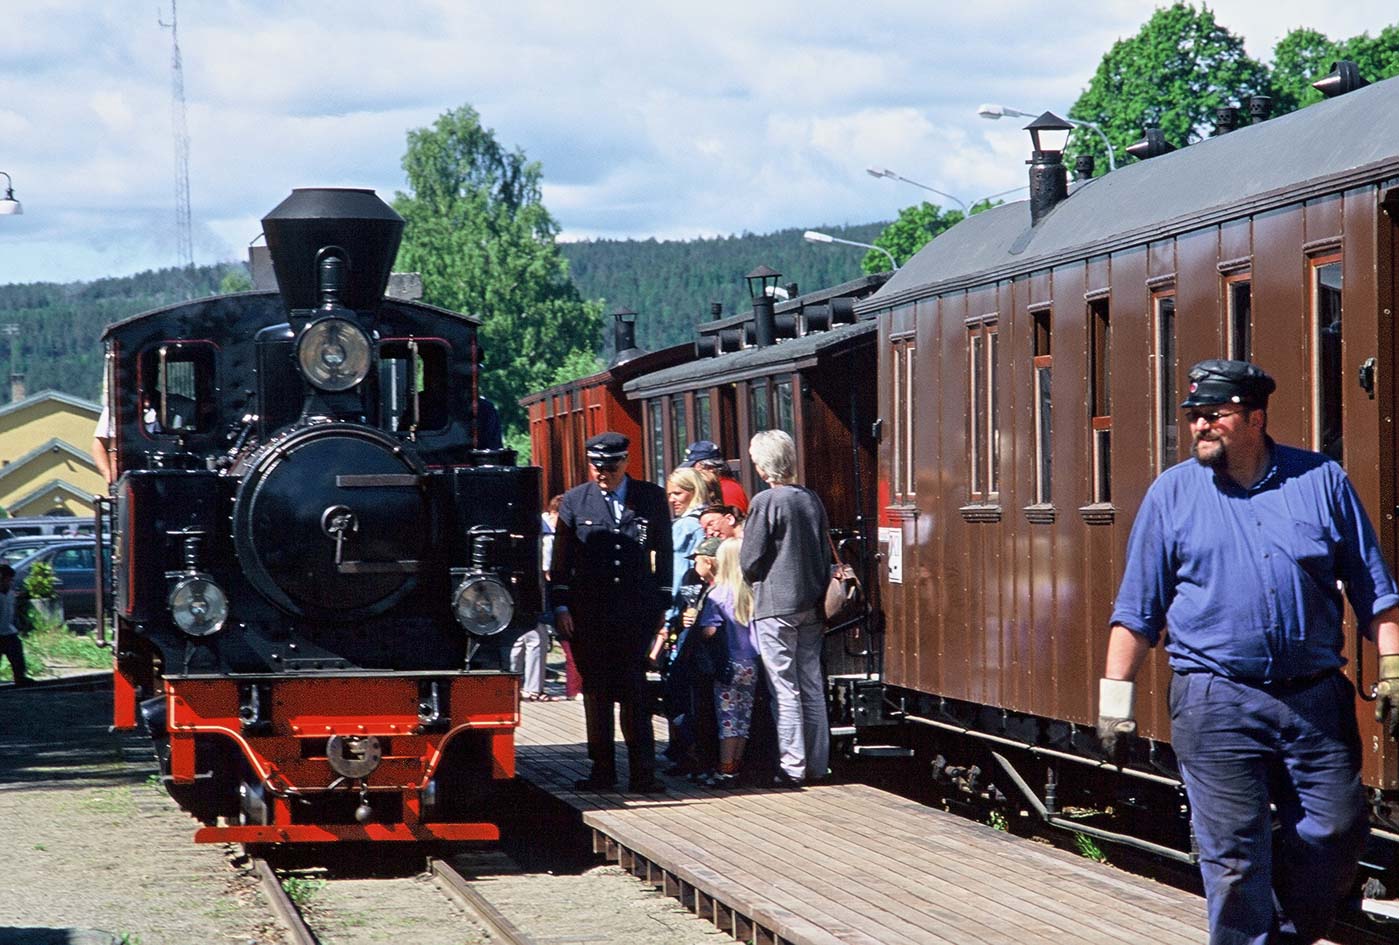 "Where the Trains used to go" - The narrow-gauge Tertitten museum railway outside Oslo, Norway. Photo by Morten Skallerud.